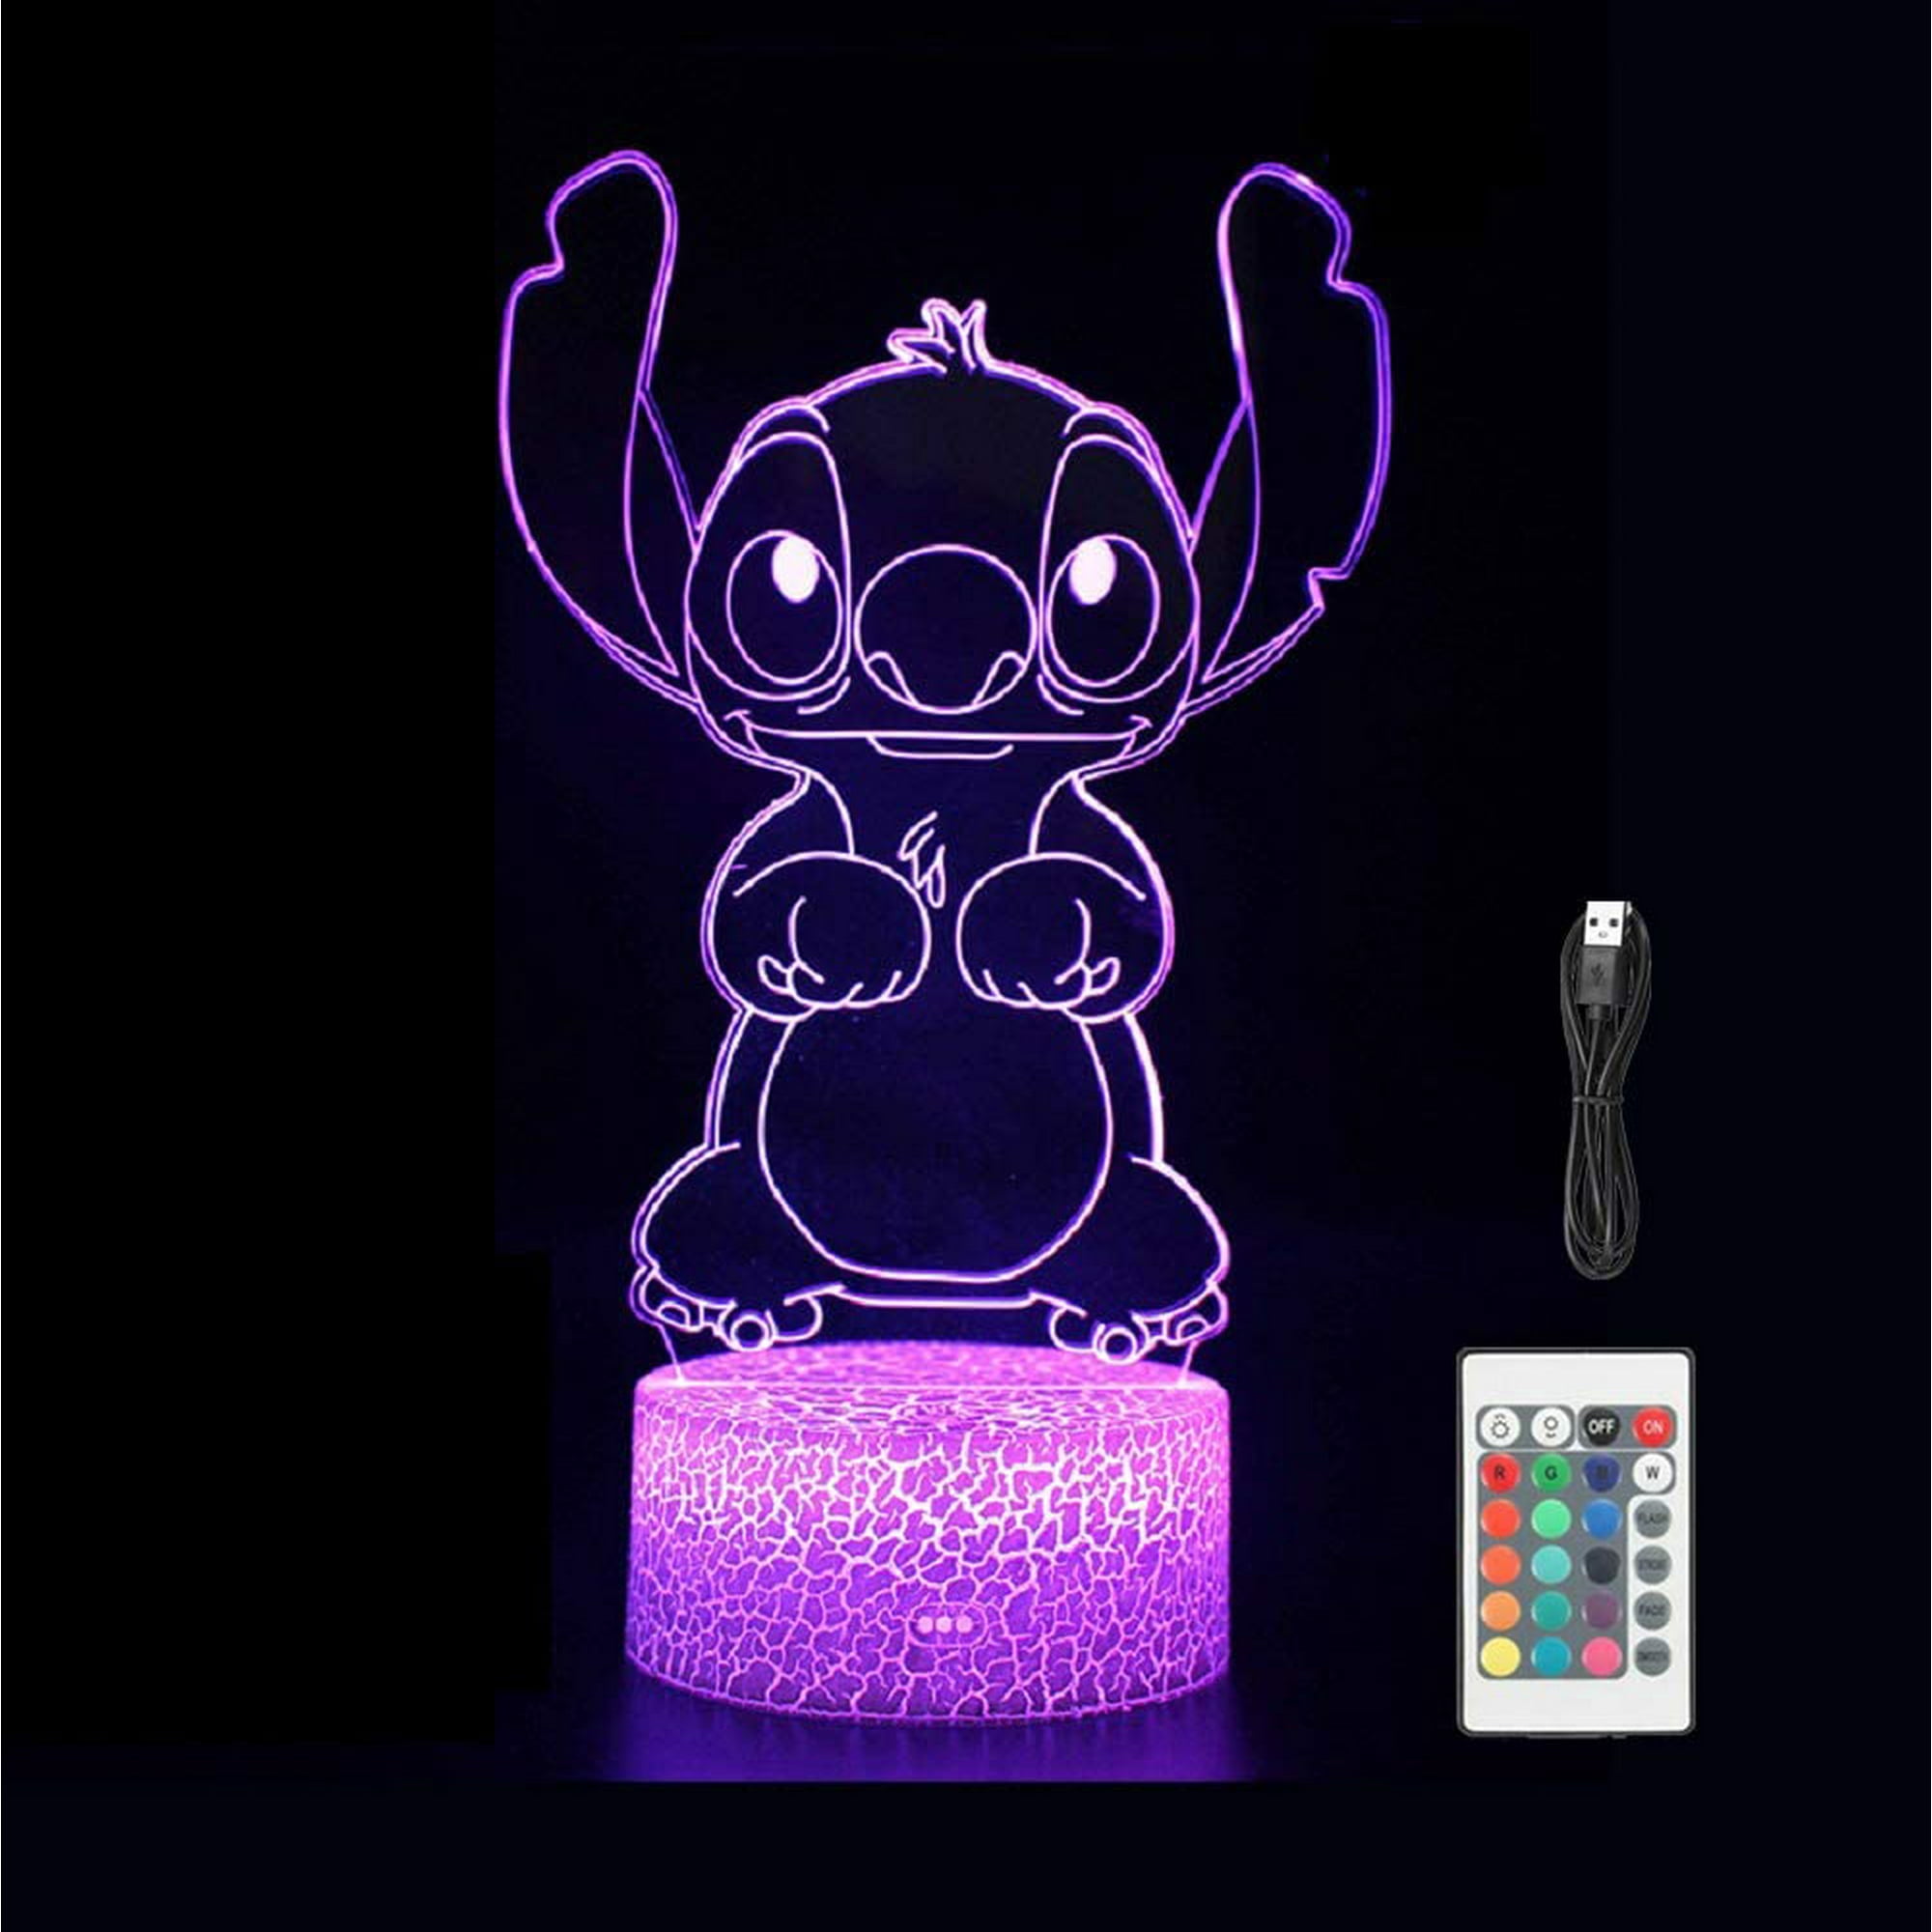 golioklsy Stitch Gifts for Kids,Stitch Night Light with Remote & Smart Touch,7 Colors + 16 Colors Changing Opreated,dimmable Stitch Toys As Bedside Lamp Holiday